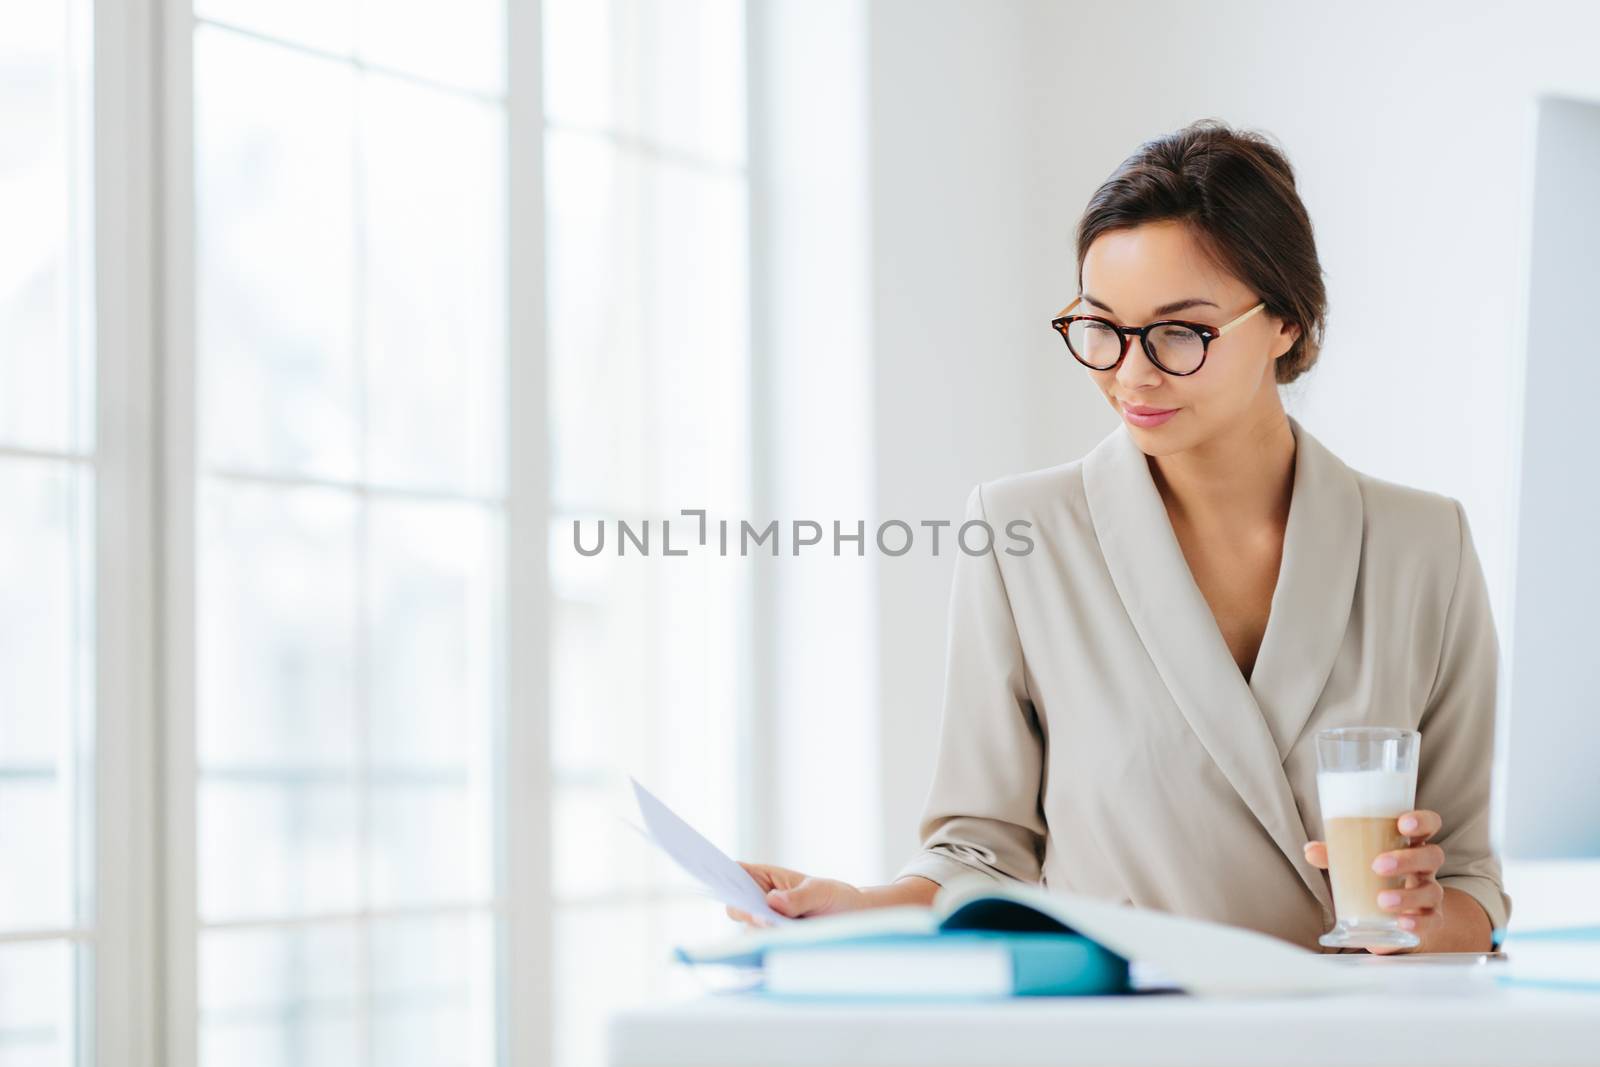 Woman economist checks information on business paper, wears spectacles and elegant suit, drinks milkshake, poses against office interior, being in cabinet, prepares startup project. Working process by vkstock